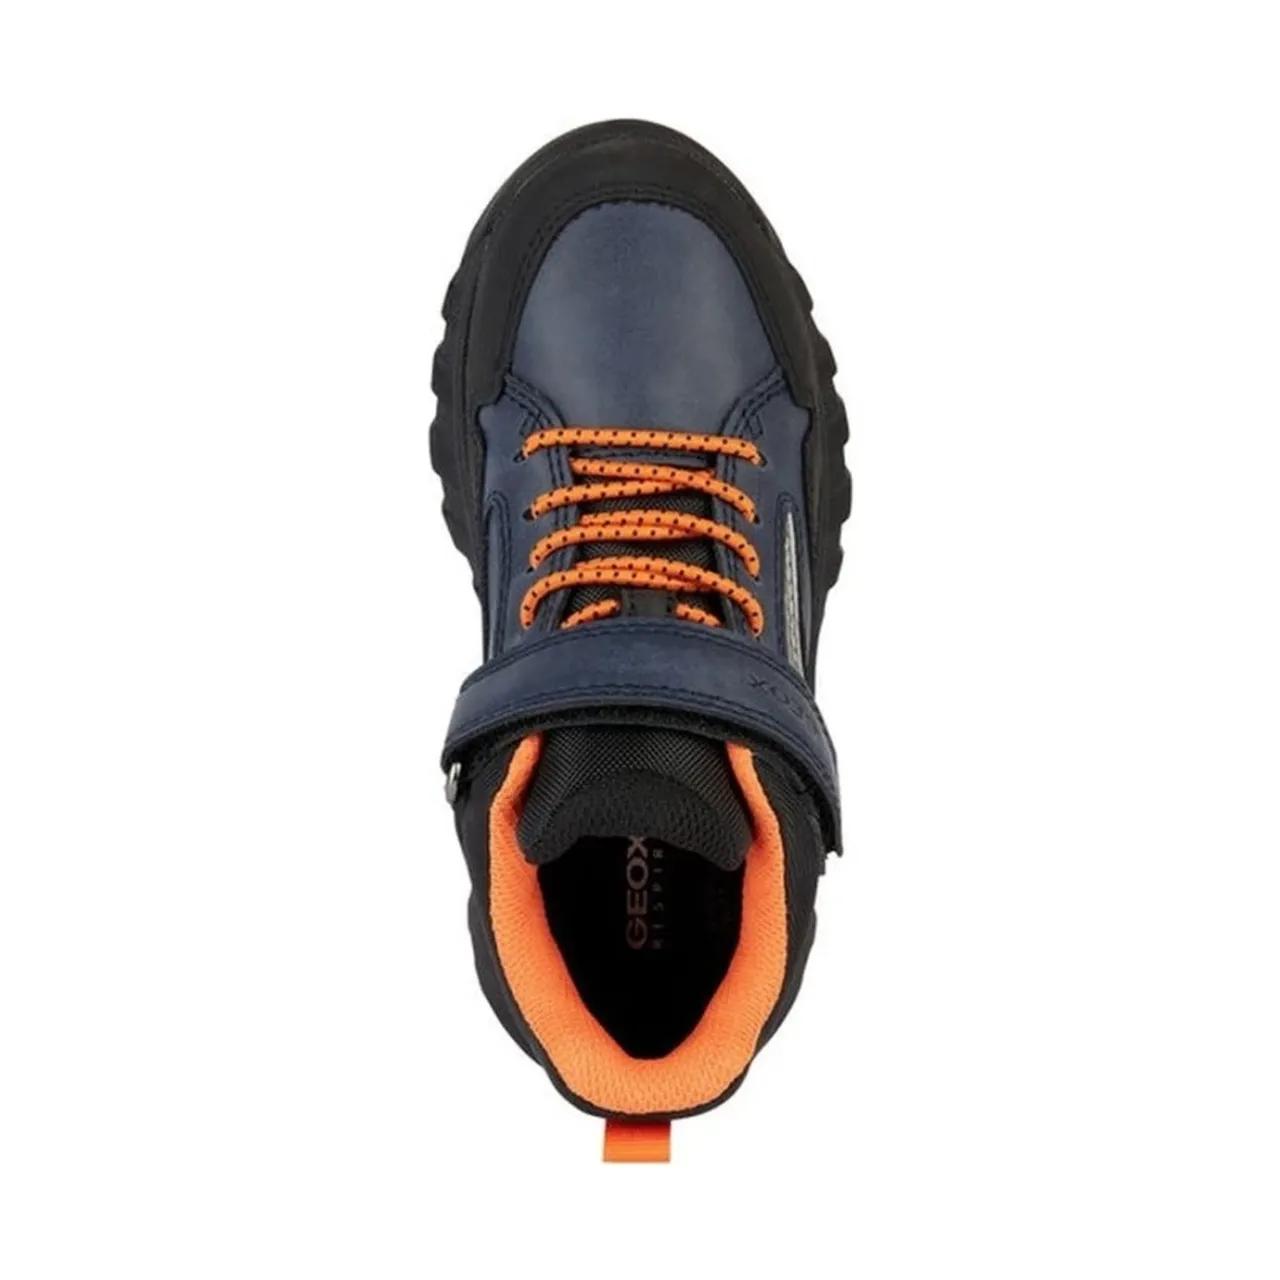 Geox , Navy Orange ABX Booties for Boys ,Blue male, Sizes: